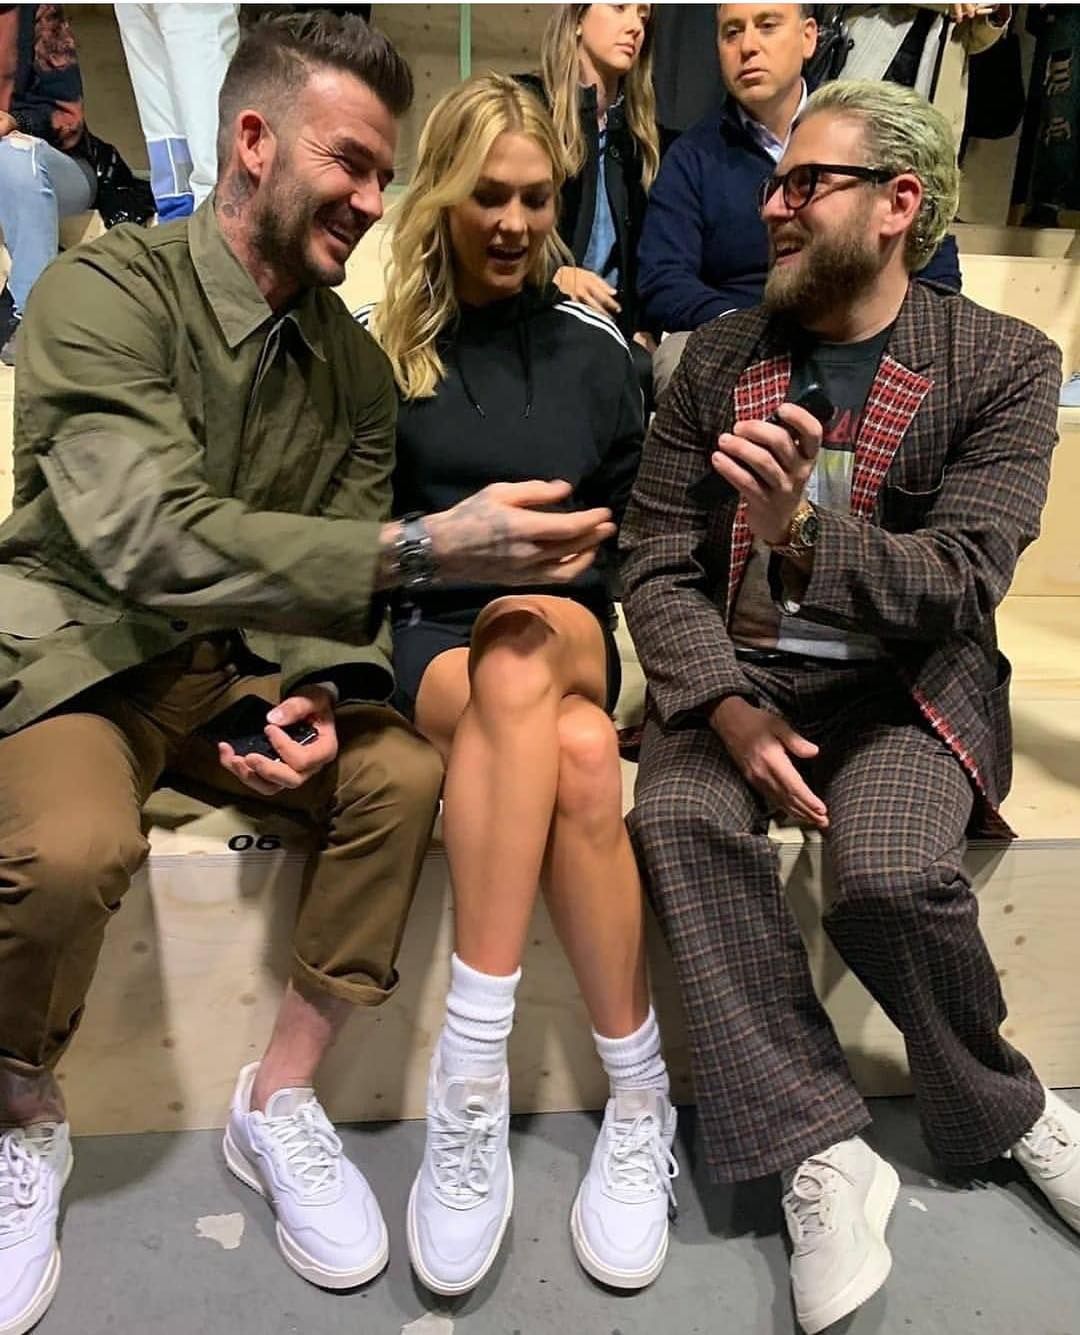 The Sole on "David Beckham is loving the brand new Super Court Premiere. Who's feeling these?! https://t.co/22pPm0g0gB" / X